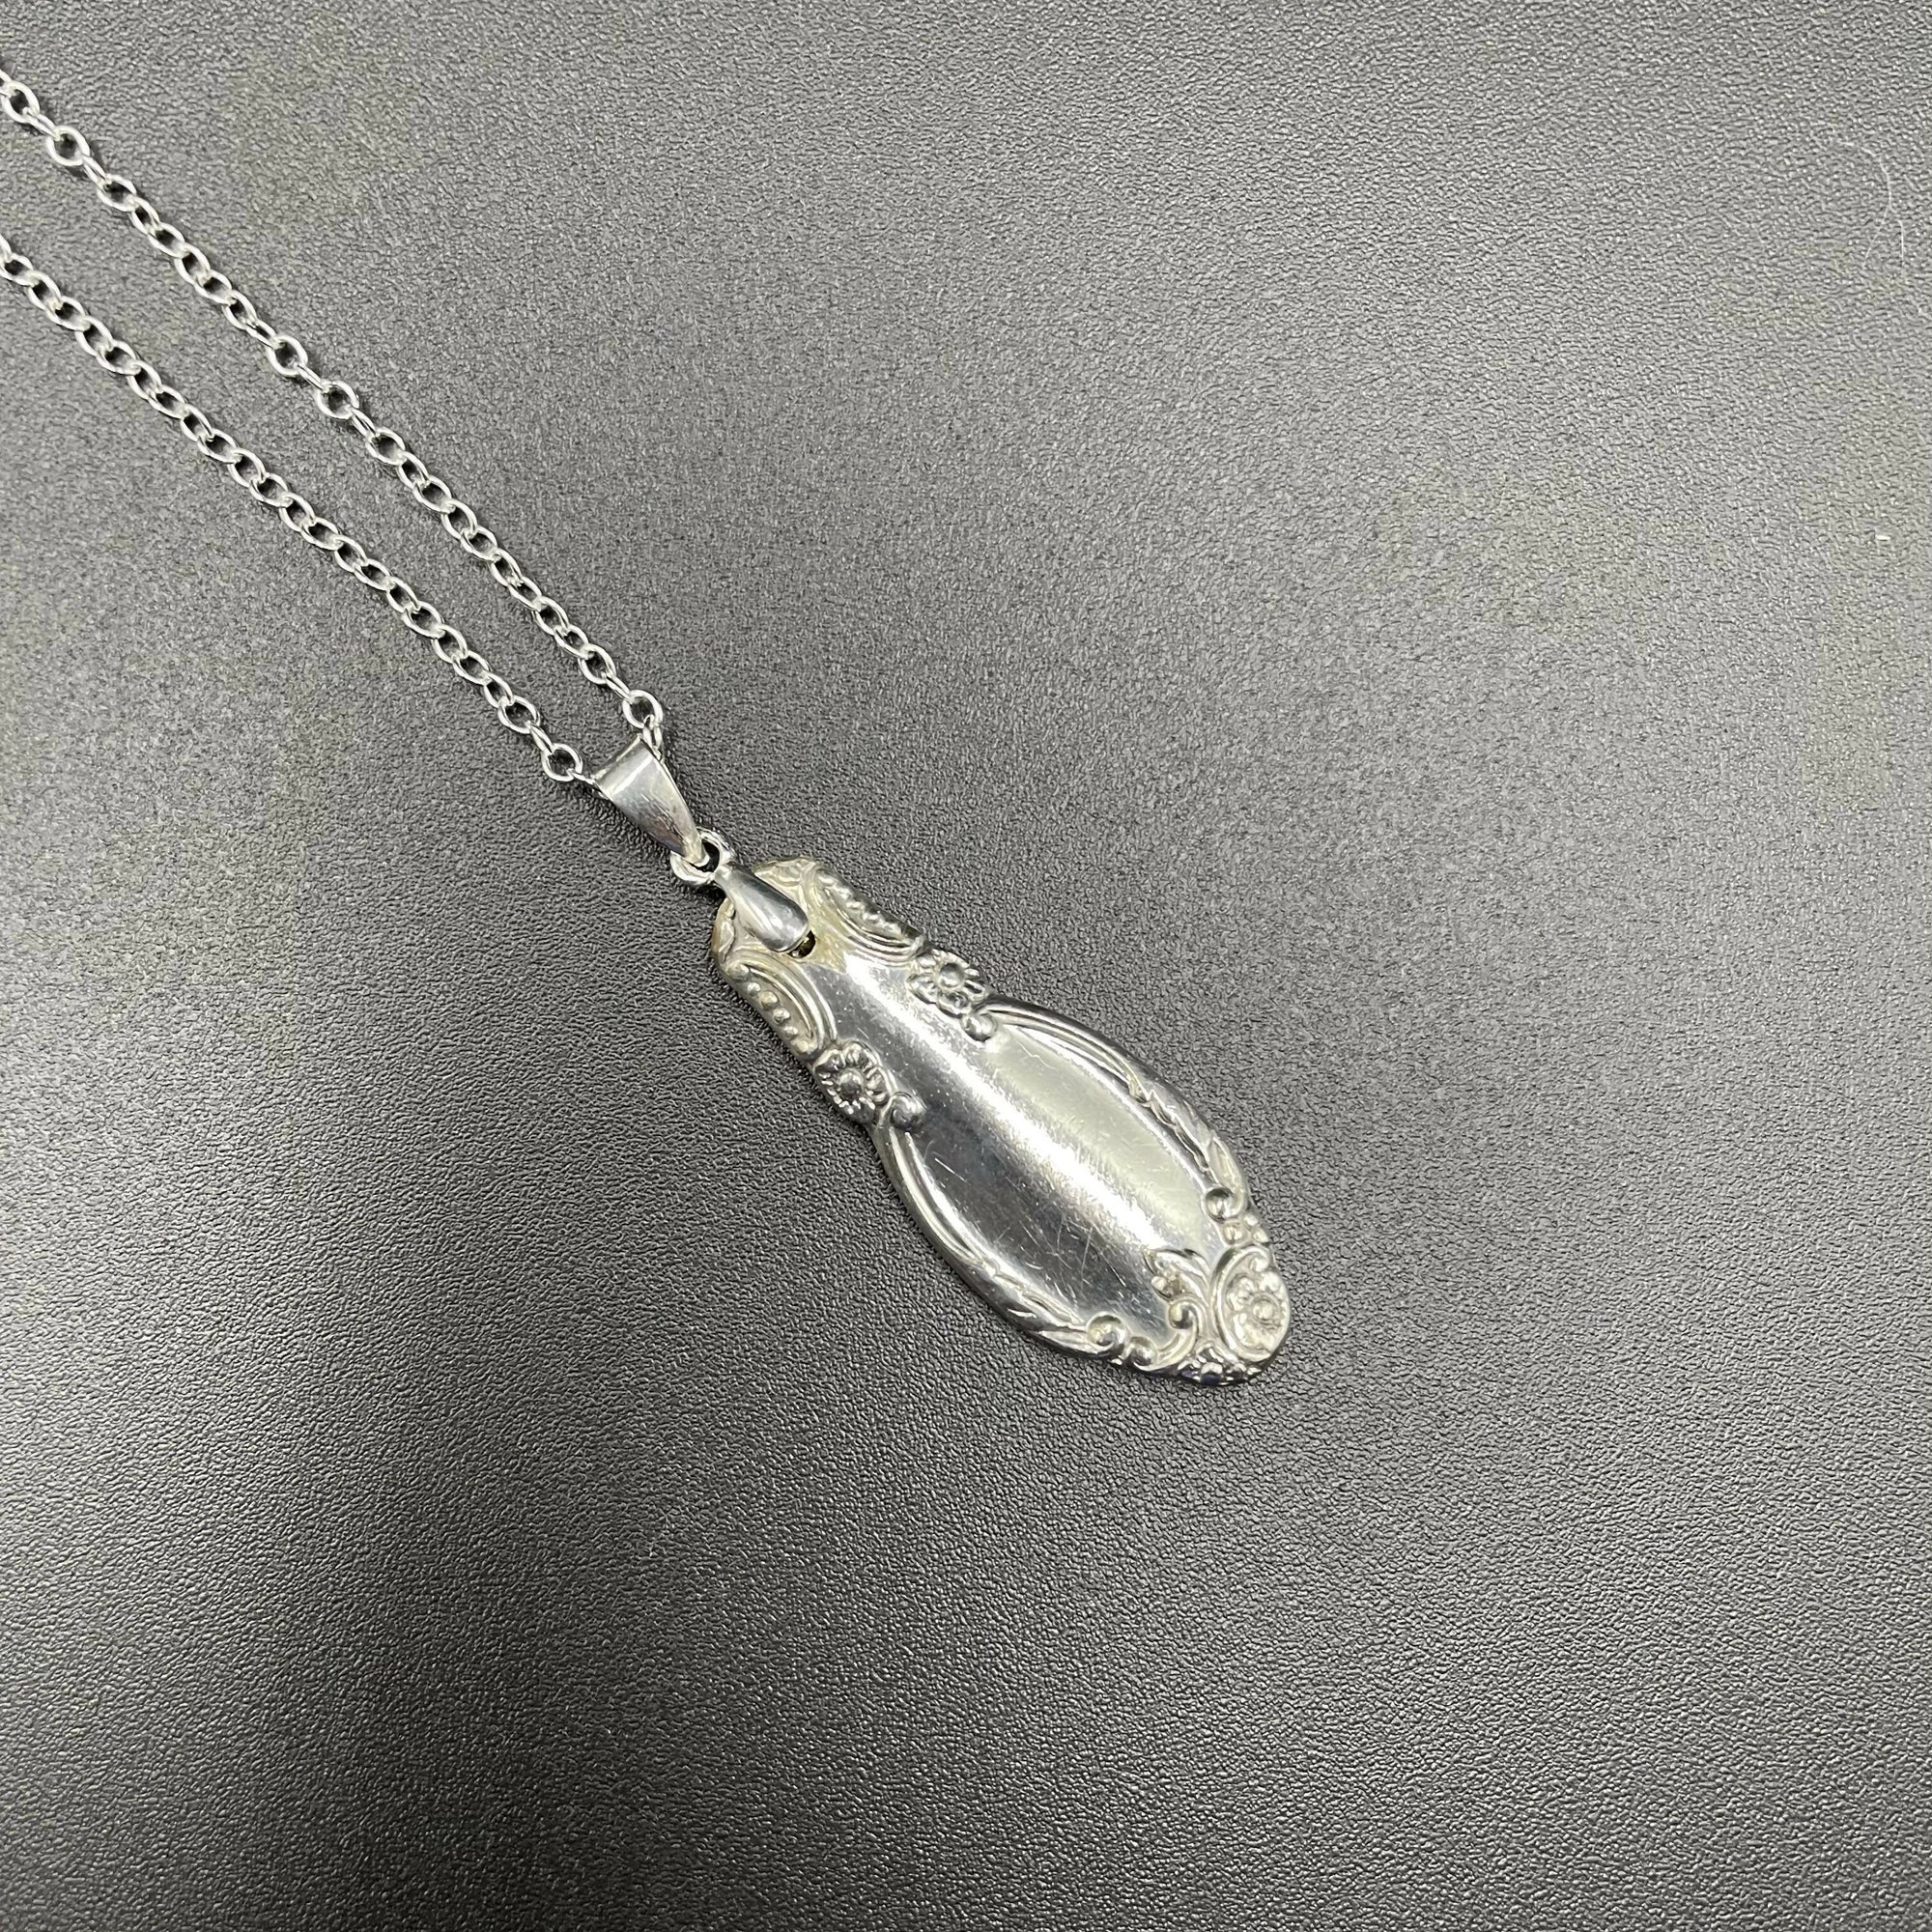 Repurposing By Glenna | Silver Spoon Pendant with Petite Flowers on a 18" Sterling Silver Chain